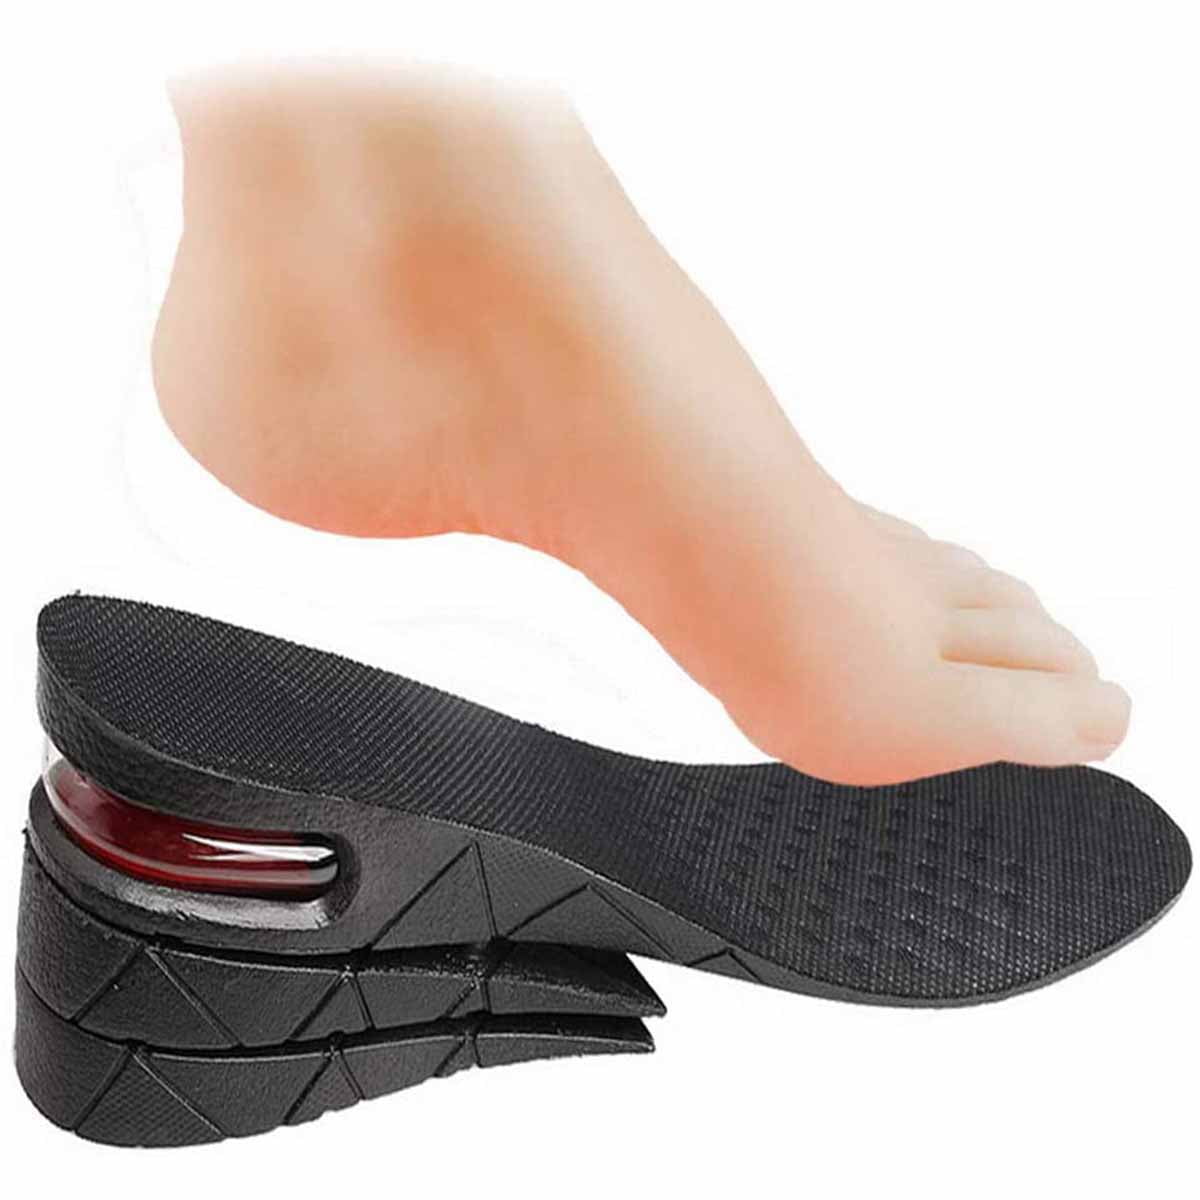 Height Increase Insole Invisible Lift Heel Pads Taller Men Women Shoe Insert US